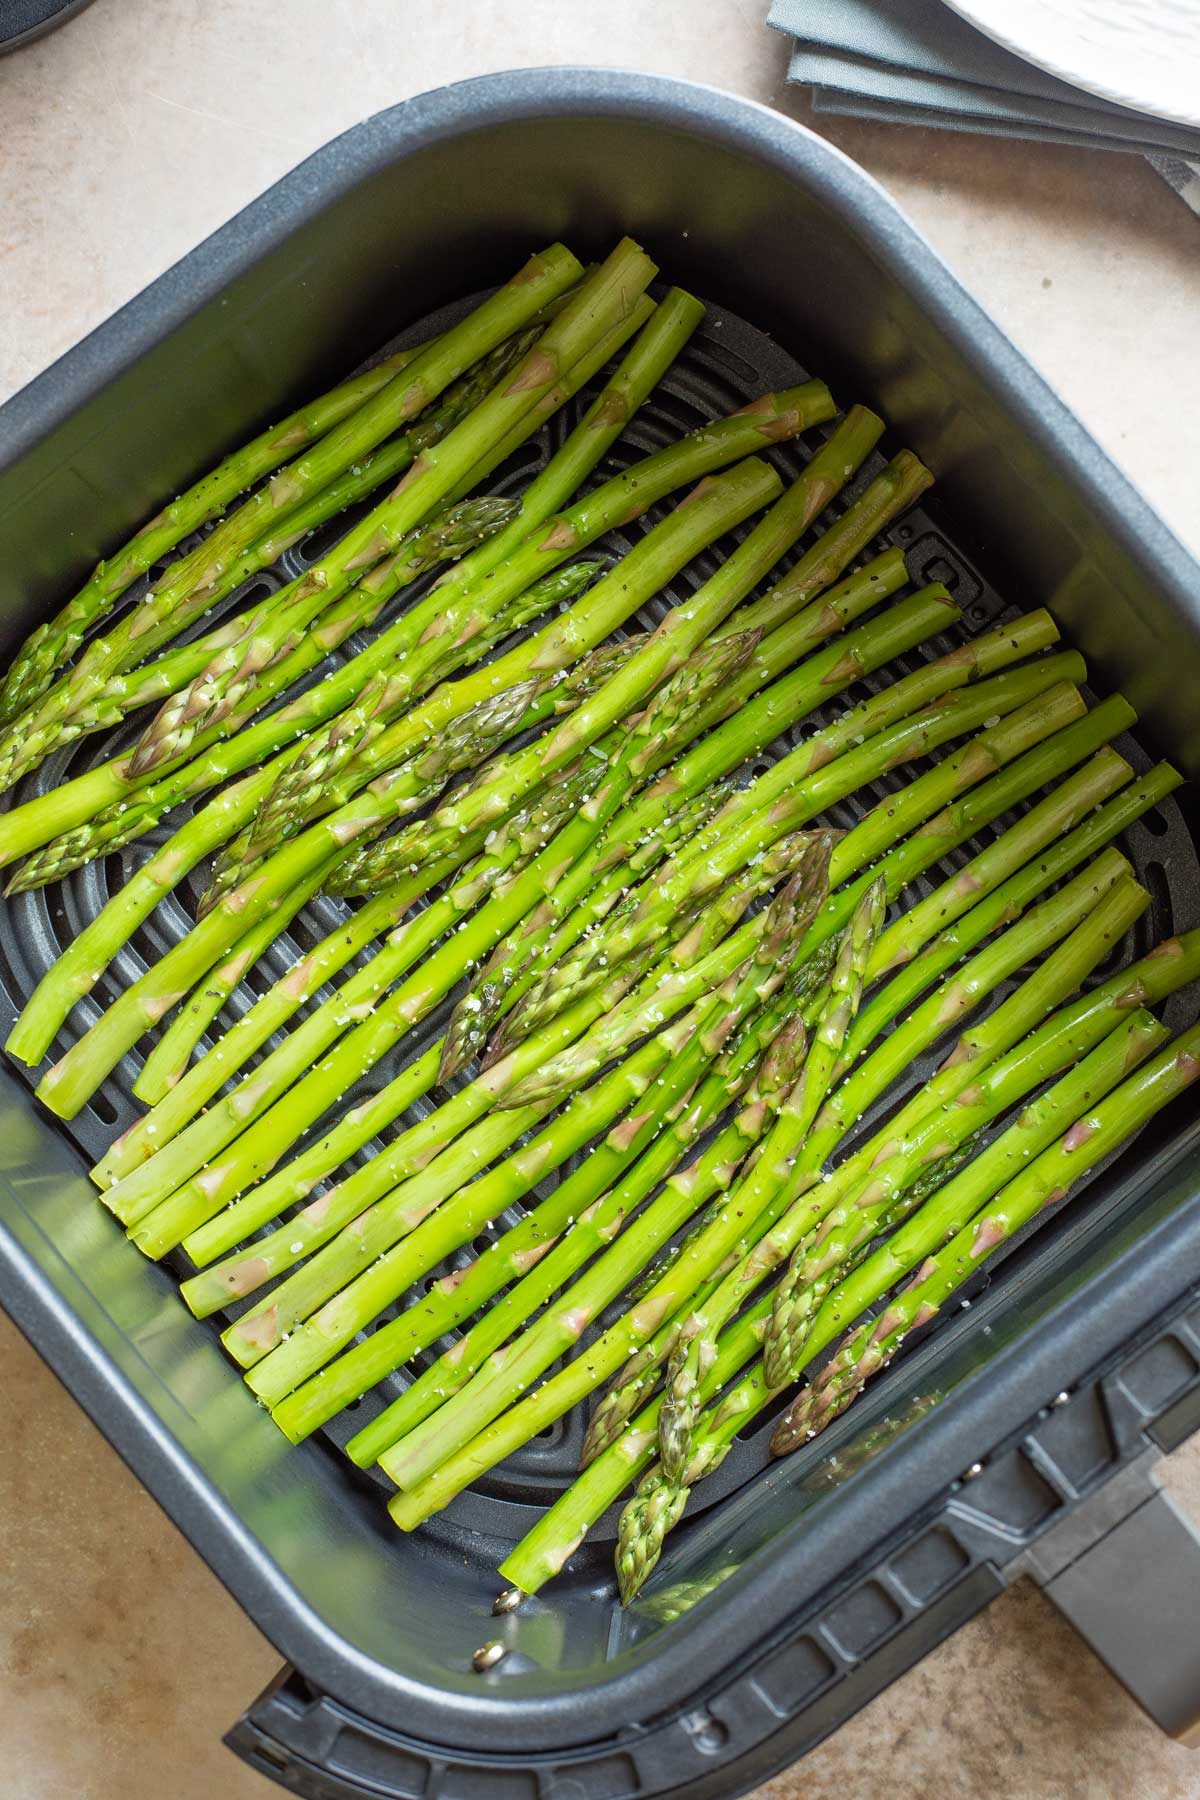 Overhead of raw asparagus spears in single layer in air fryer basket before cooking.